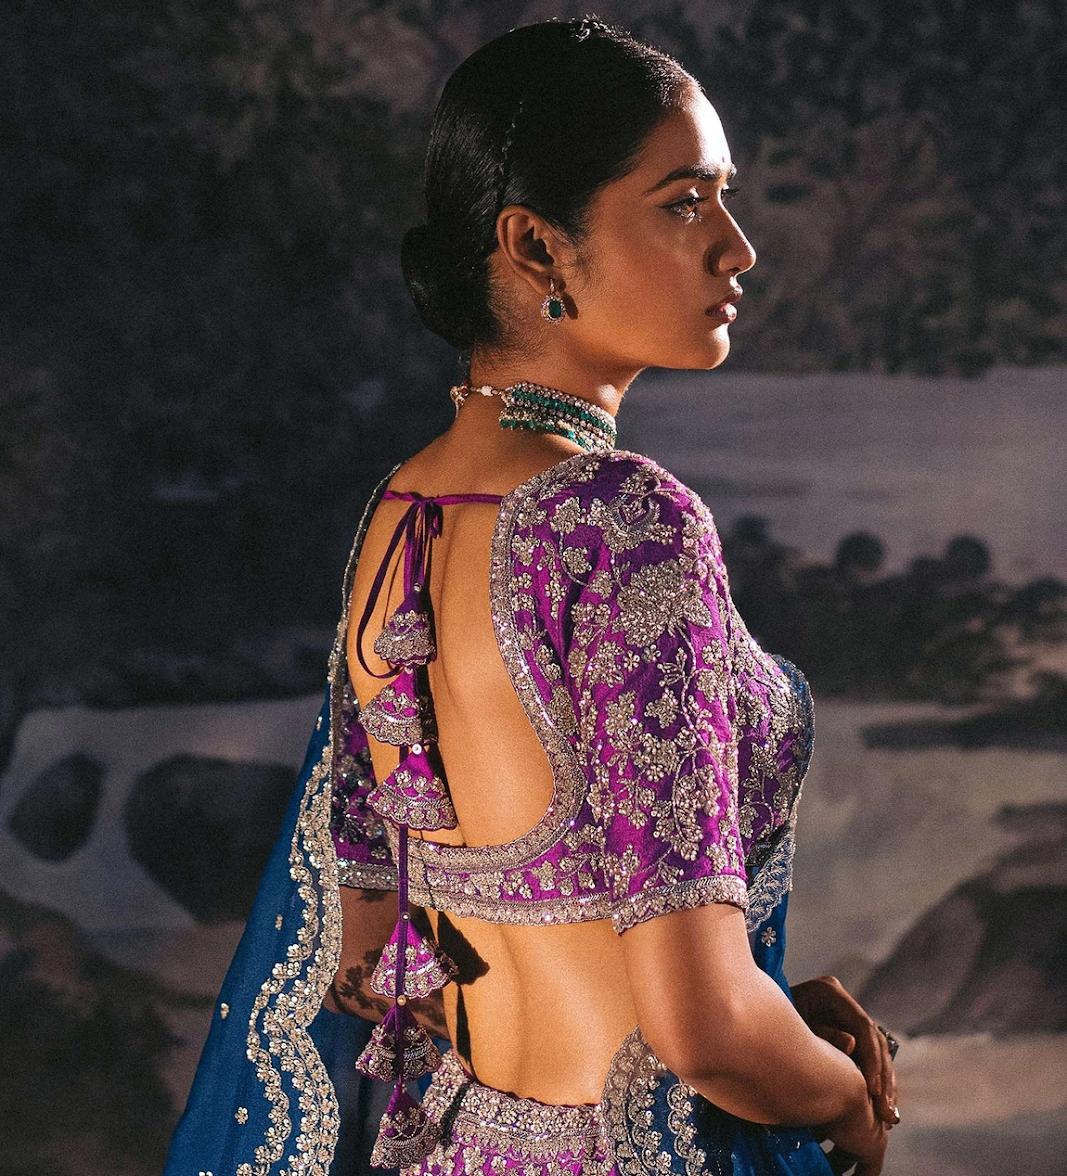 40 Best Collection of Lehenga Blouse Designs in Fashion World